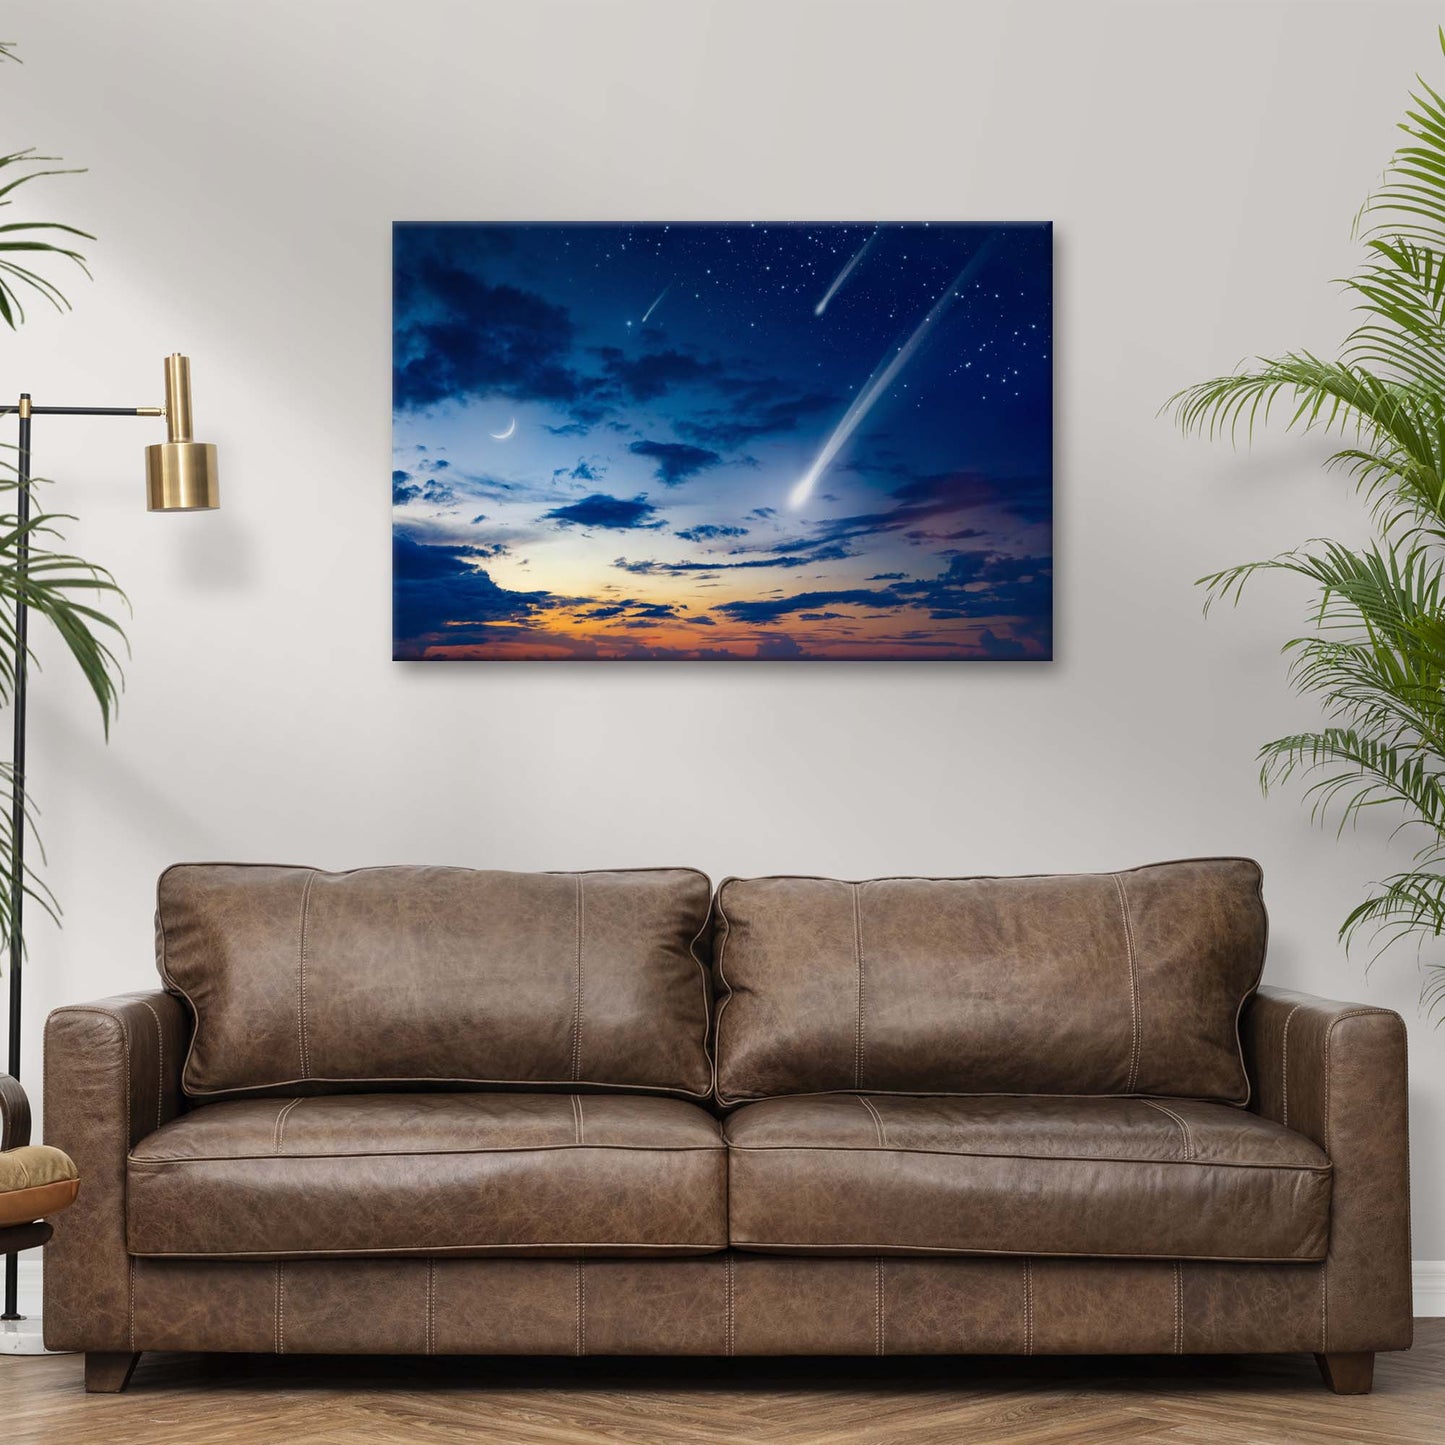 Comet And Clouds Canvas Wall Art  - Image by Tailored Canvases